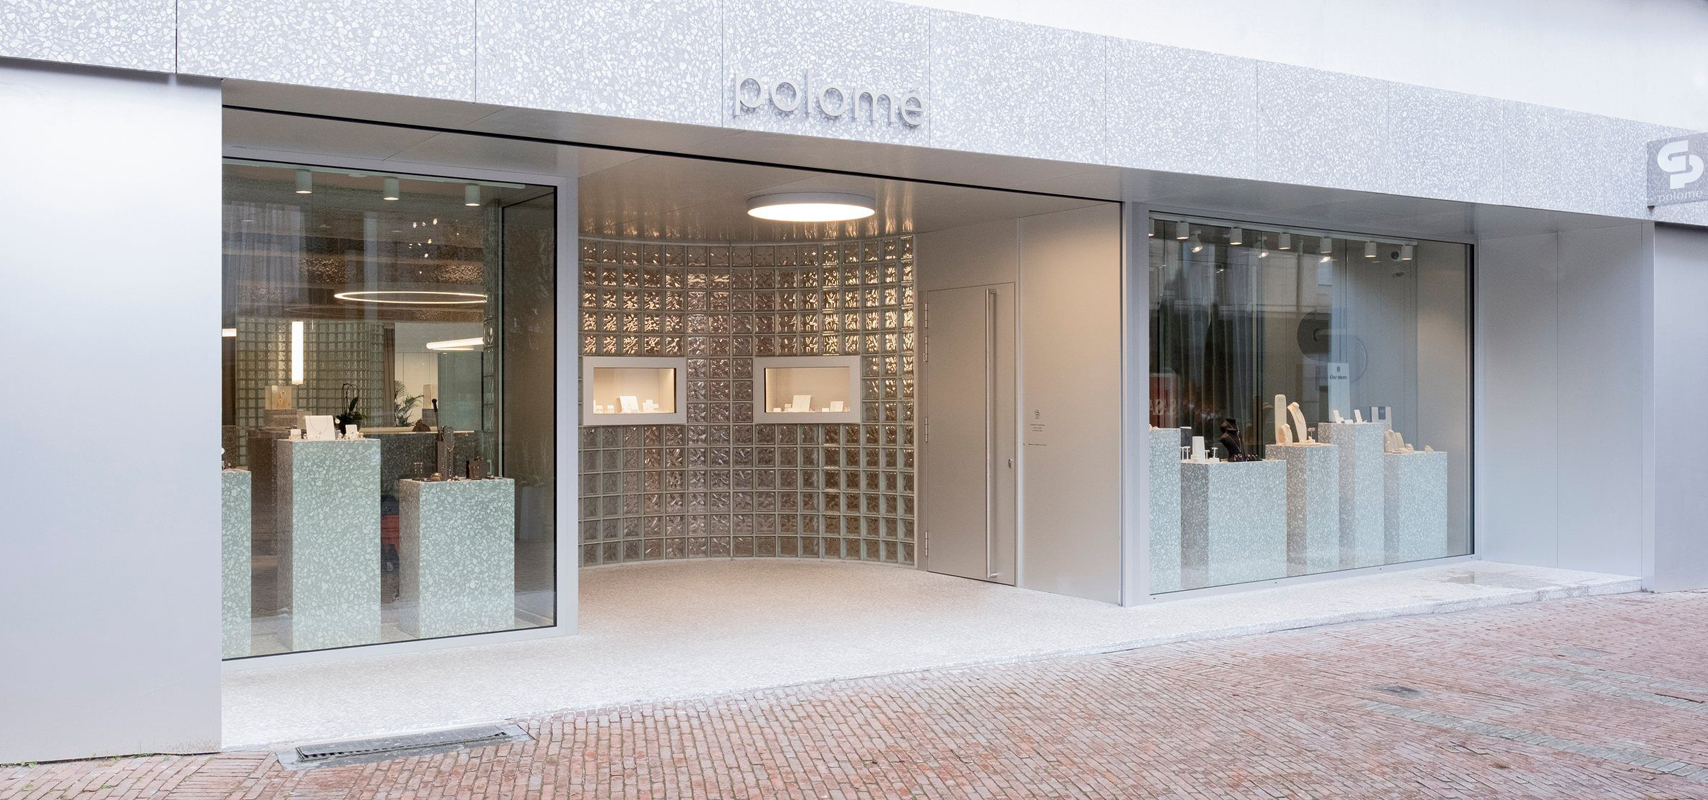 Polomé Jewelry Flagship Store